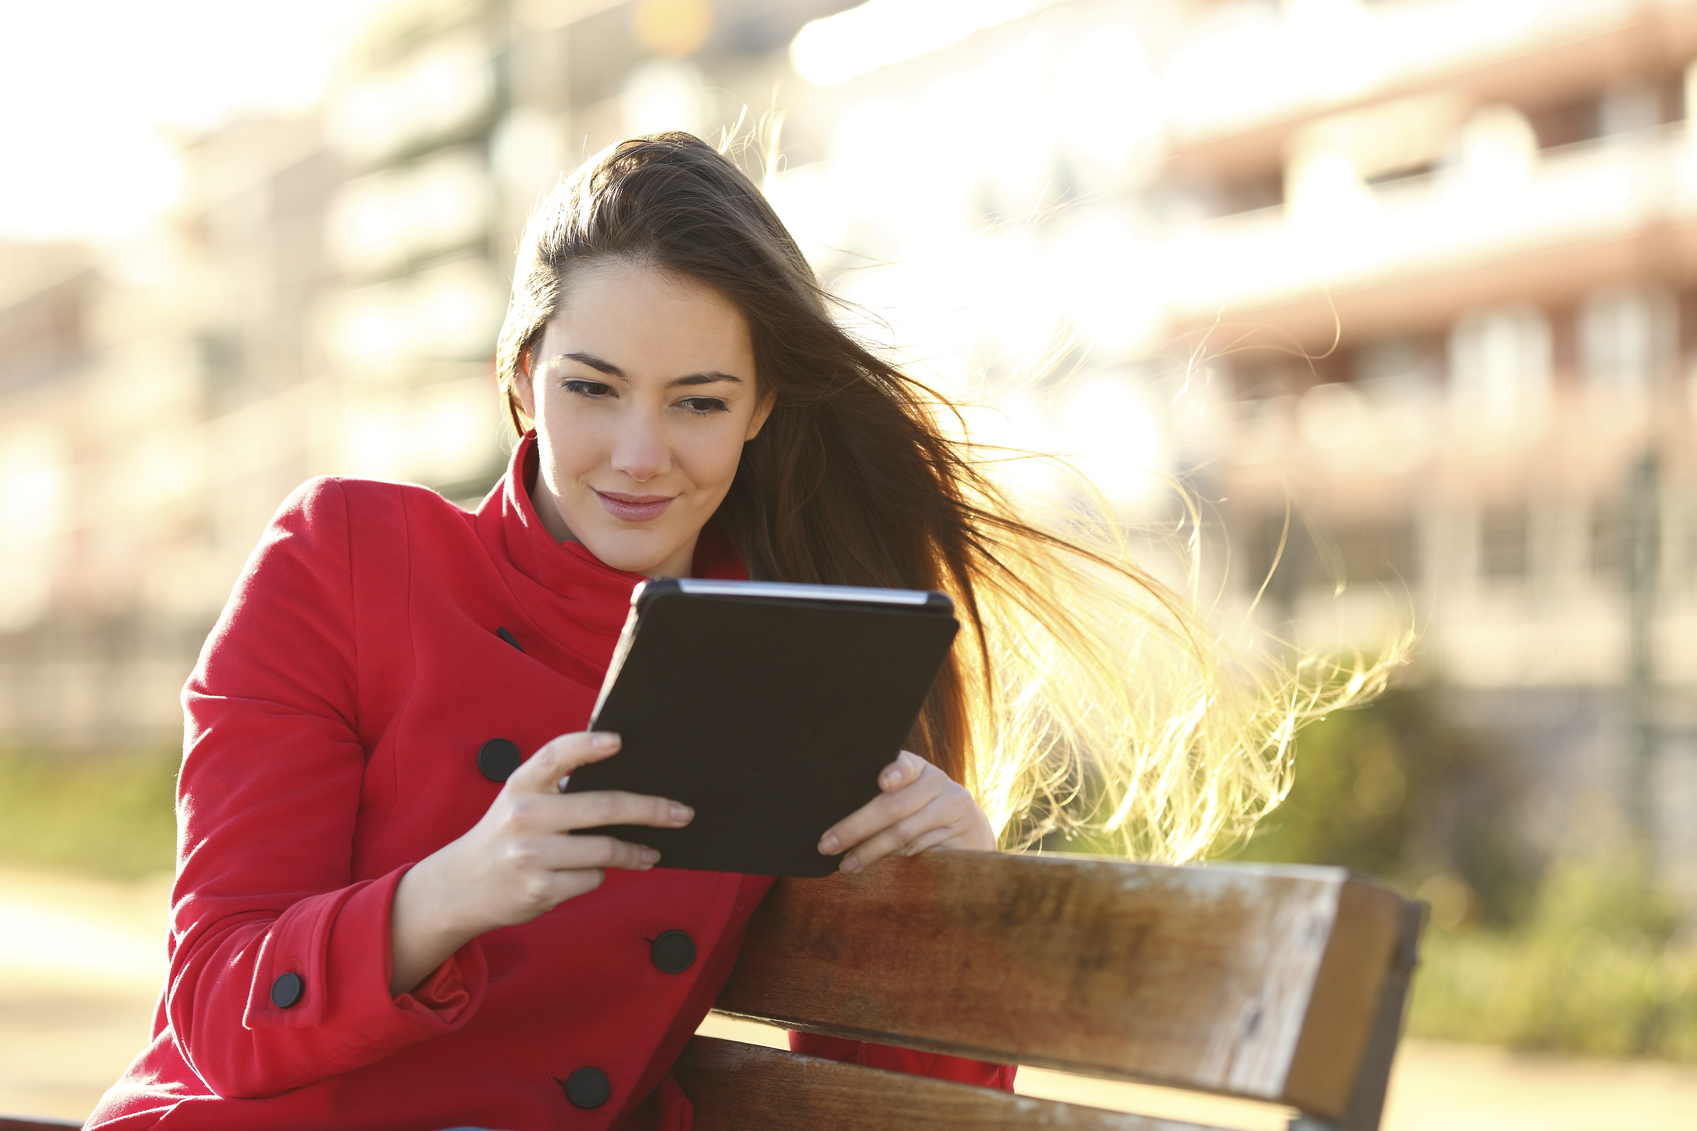 Woman reading an ebook or tablet in an urban park with buildings in the background